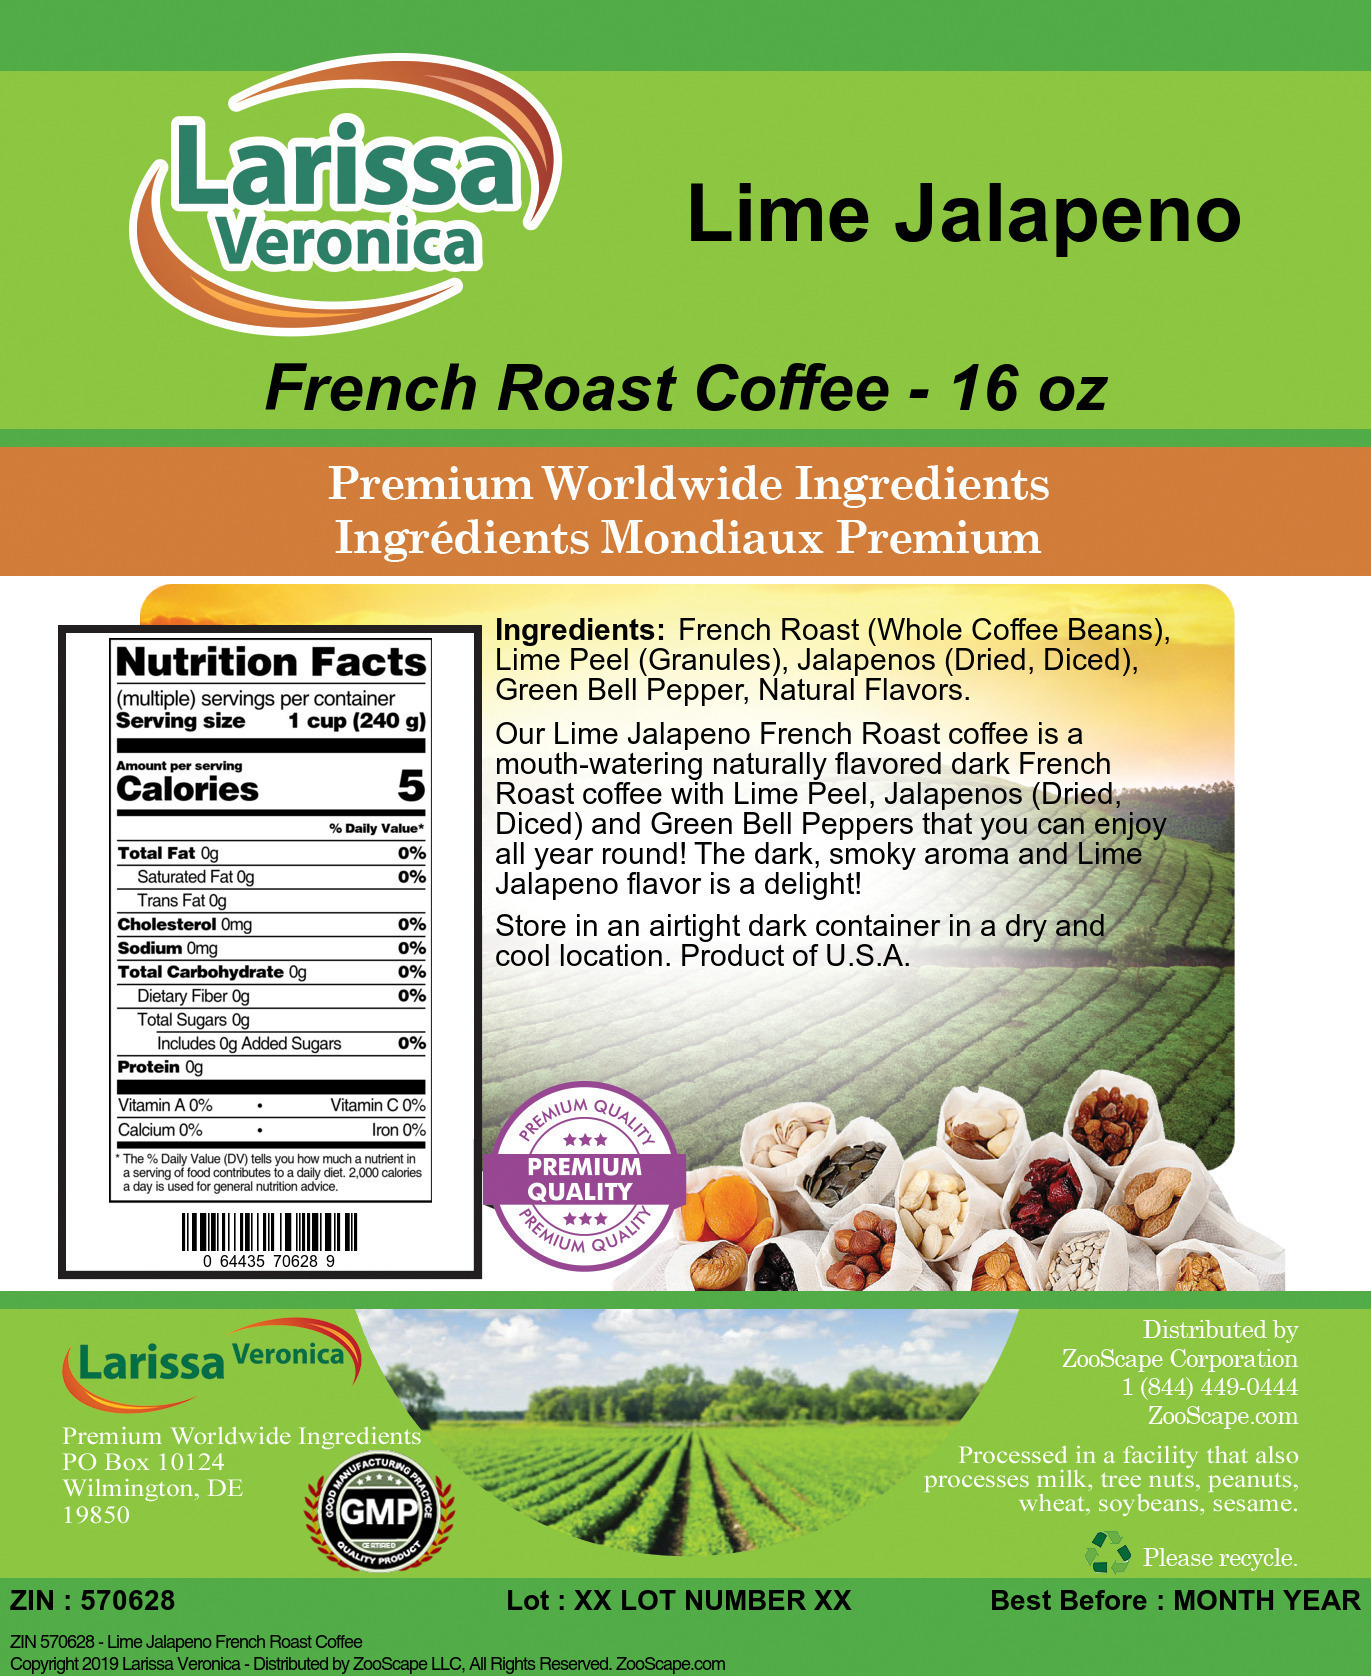 Lime Jalapeno French Roast Coffee - Label